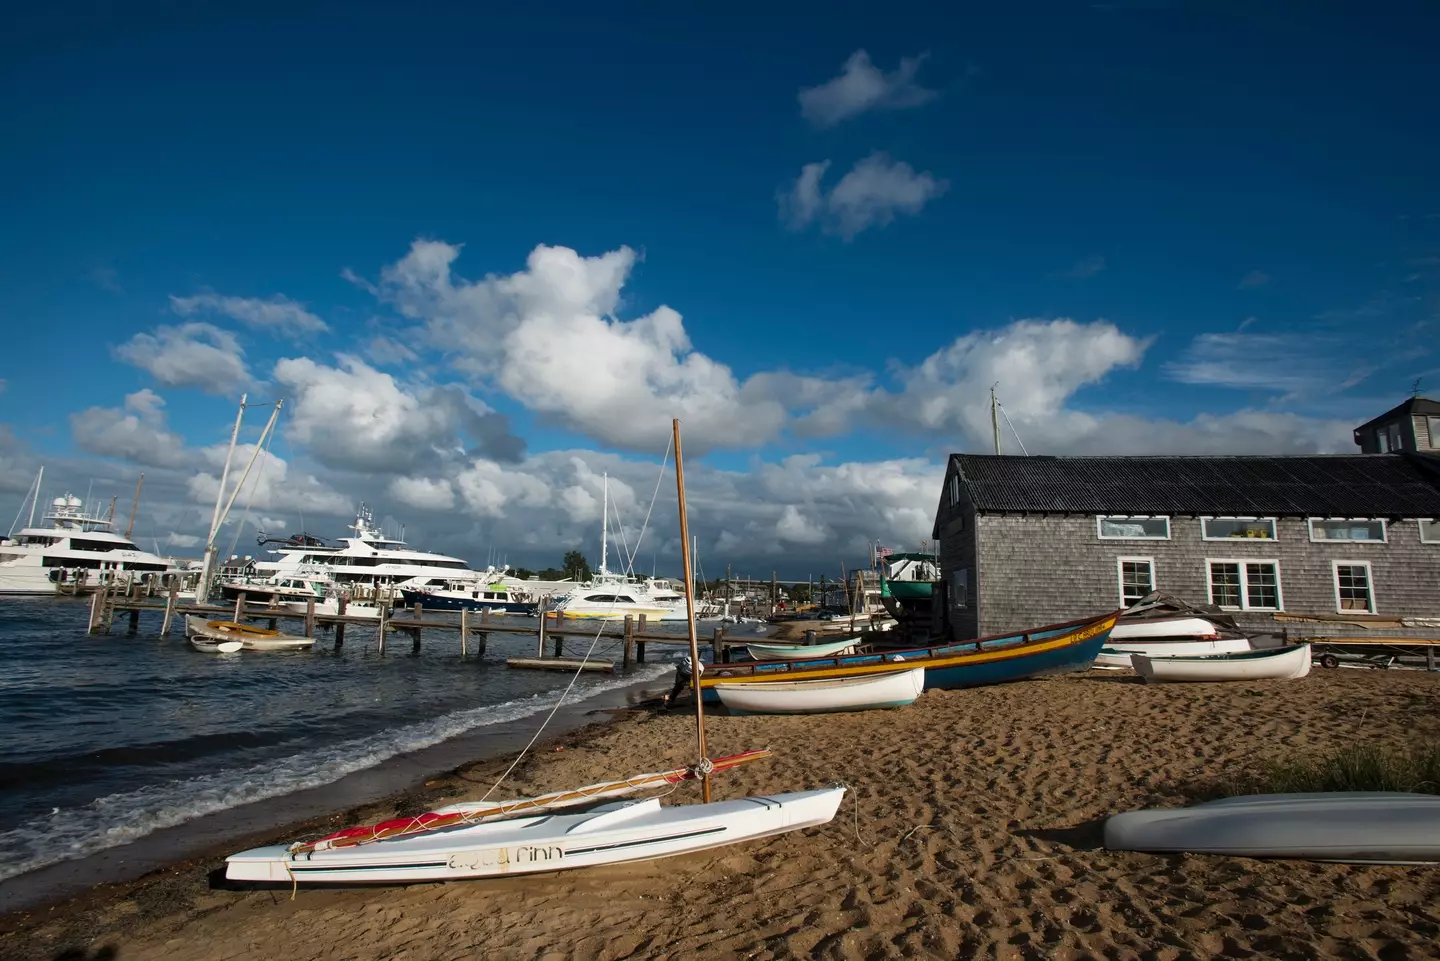 Martha's Vineyard was one of the filming locations on Jaws. (Rick Friedman/Getty Images)